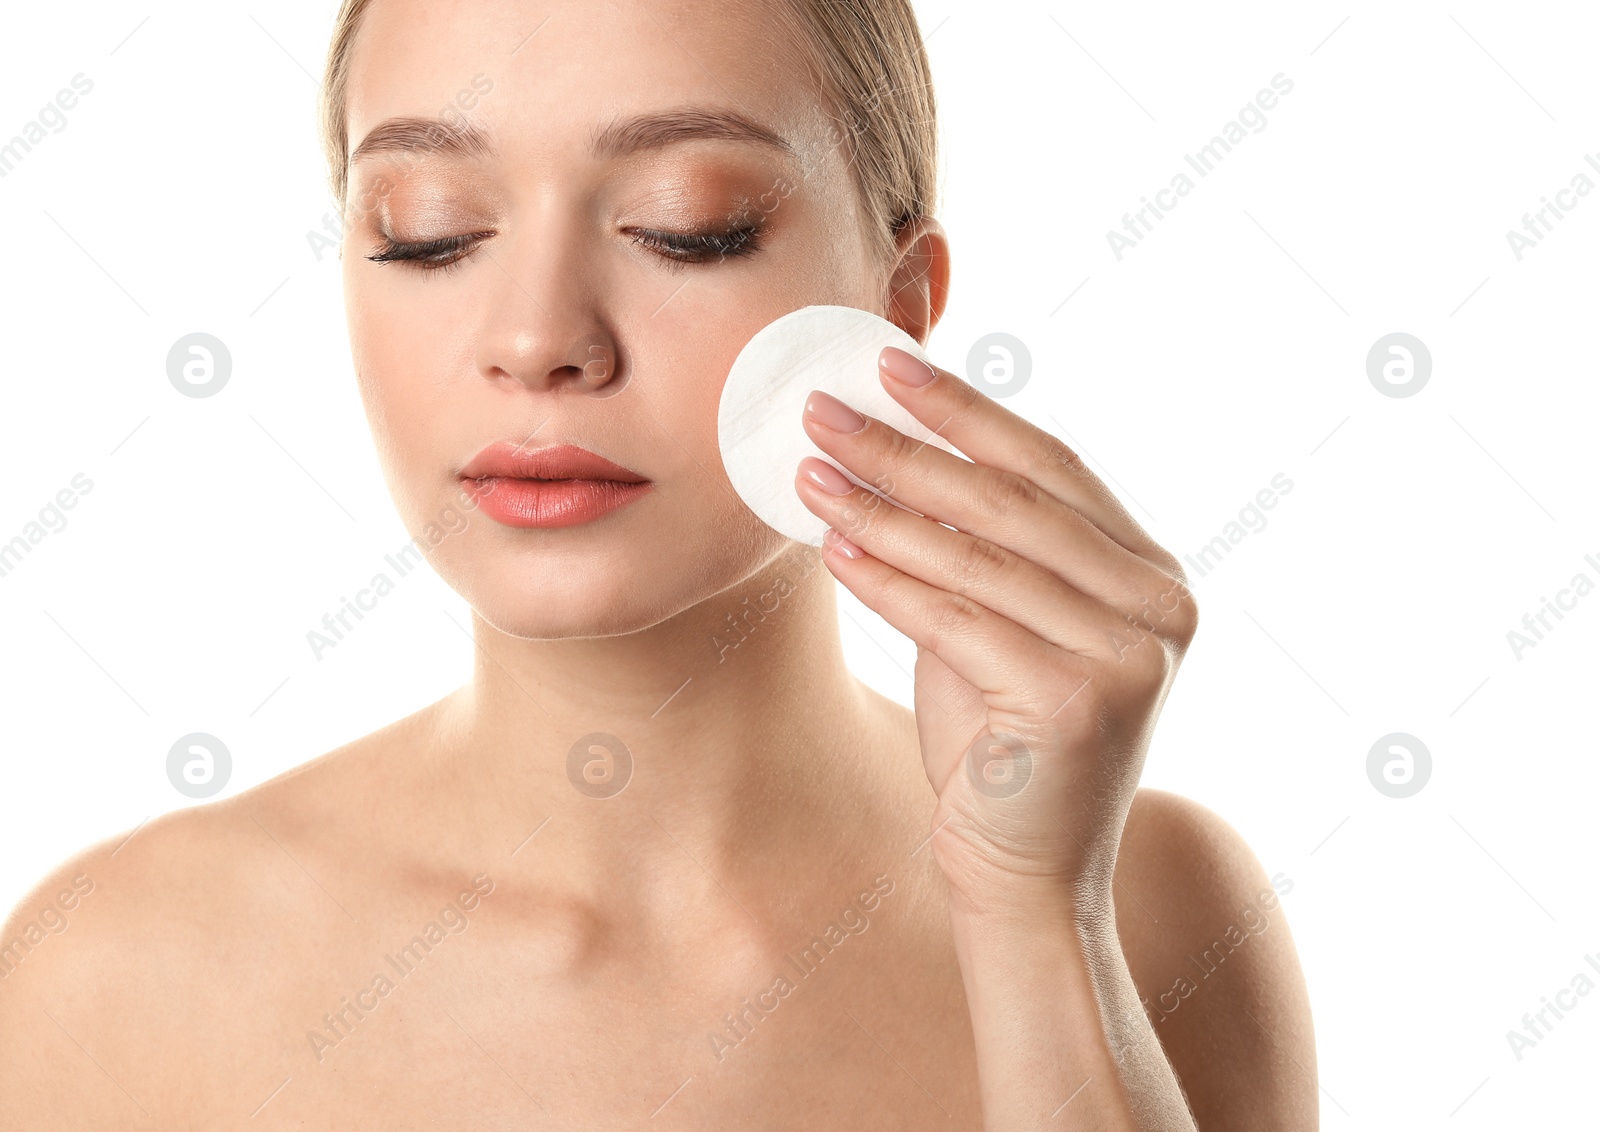 Photo of Portrait of beautiful young woman removing makeup with cotton pad on white background